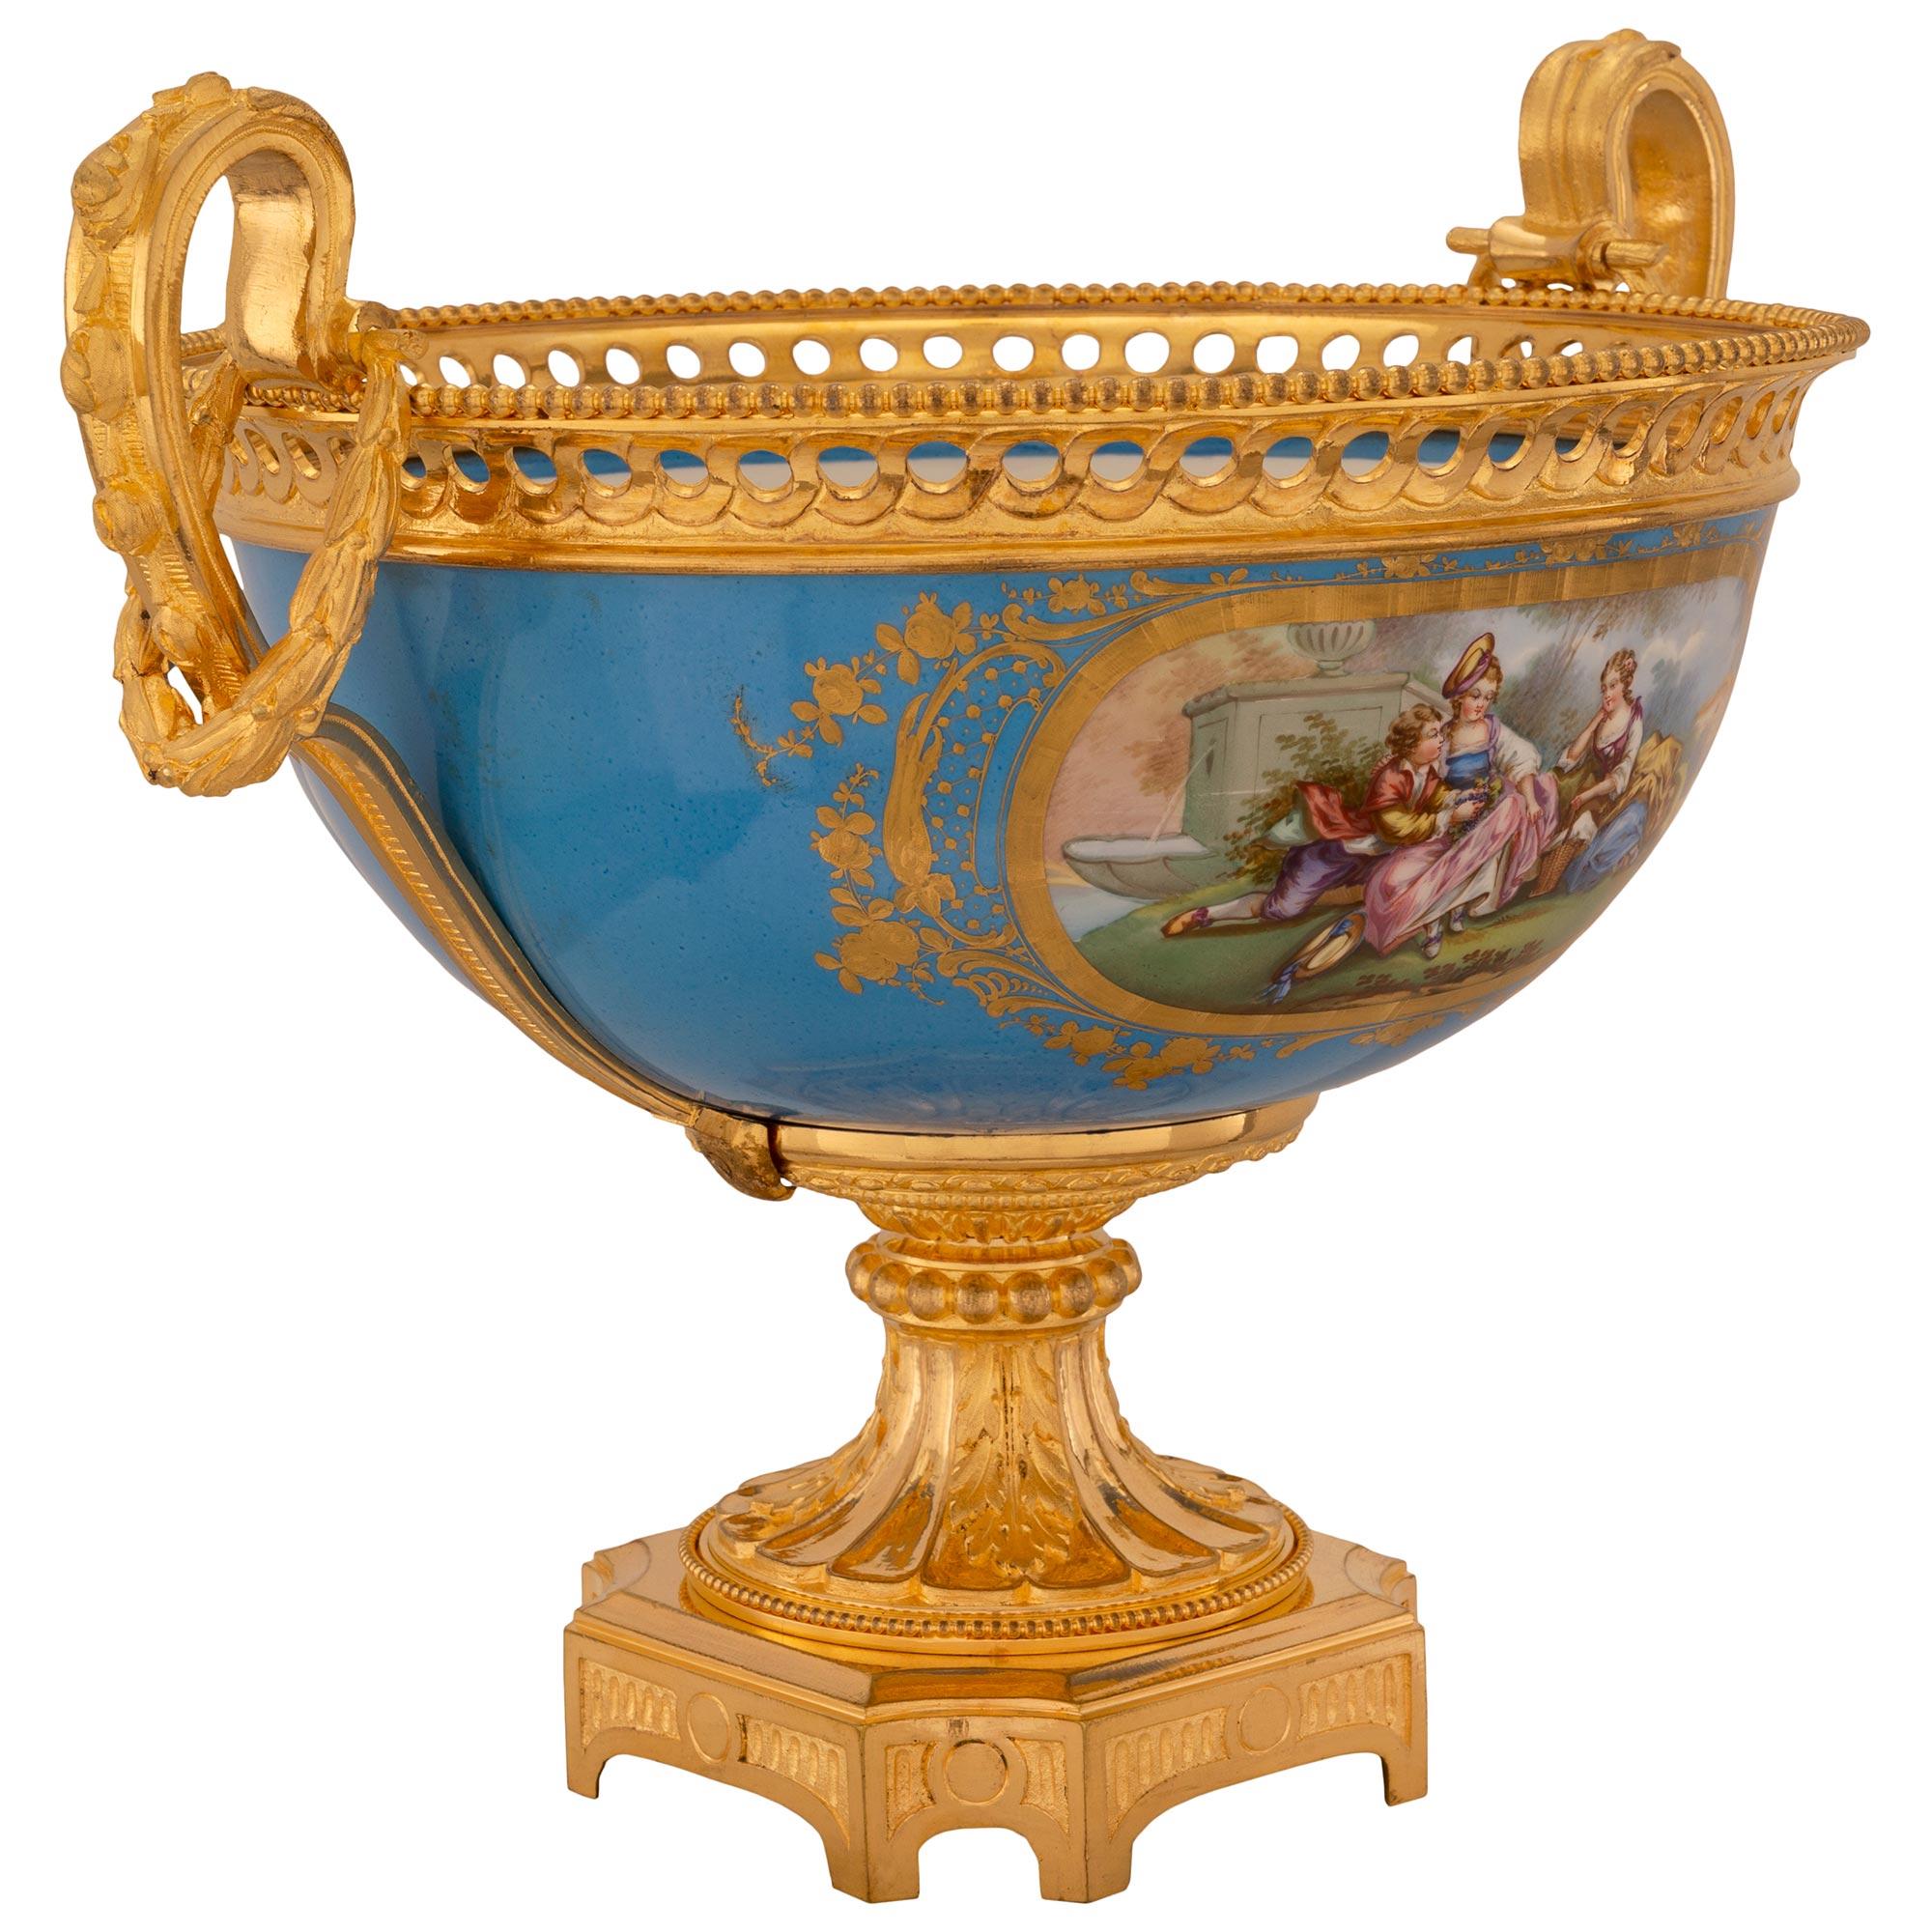 French 19th Century Louis XVI St. Sèvres Porcelain and Ormolu Centerpiece In Good Condition For Sale In West Palm Beach, FL